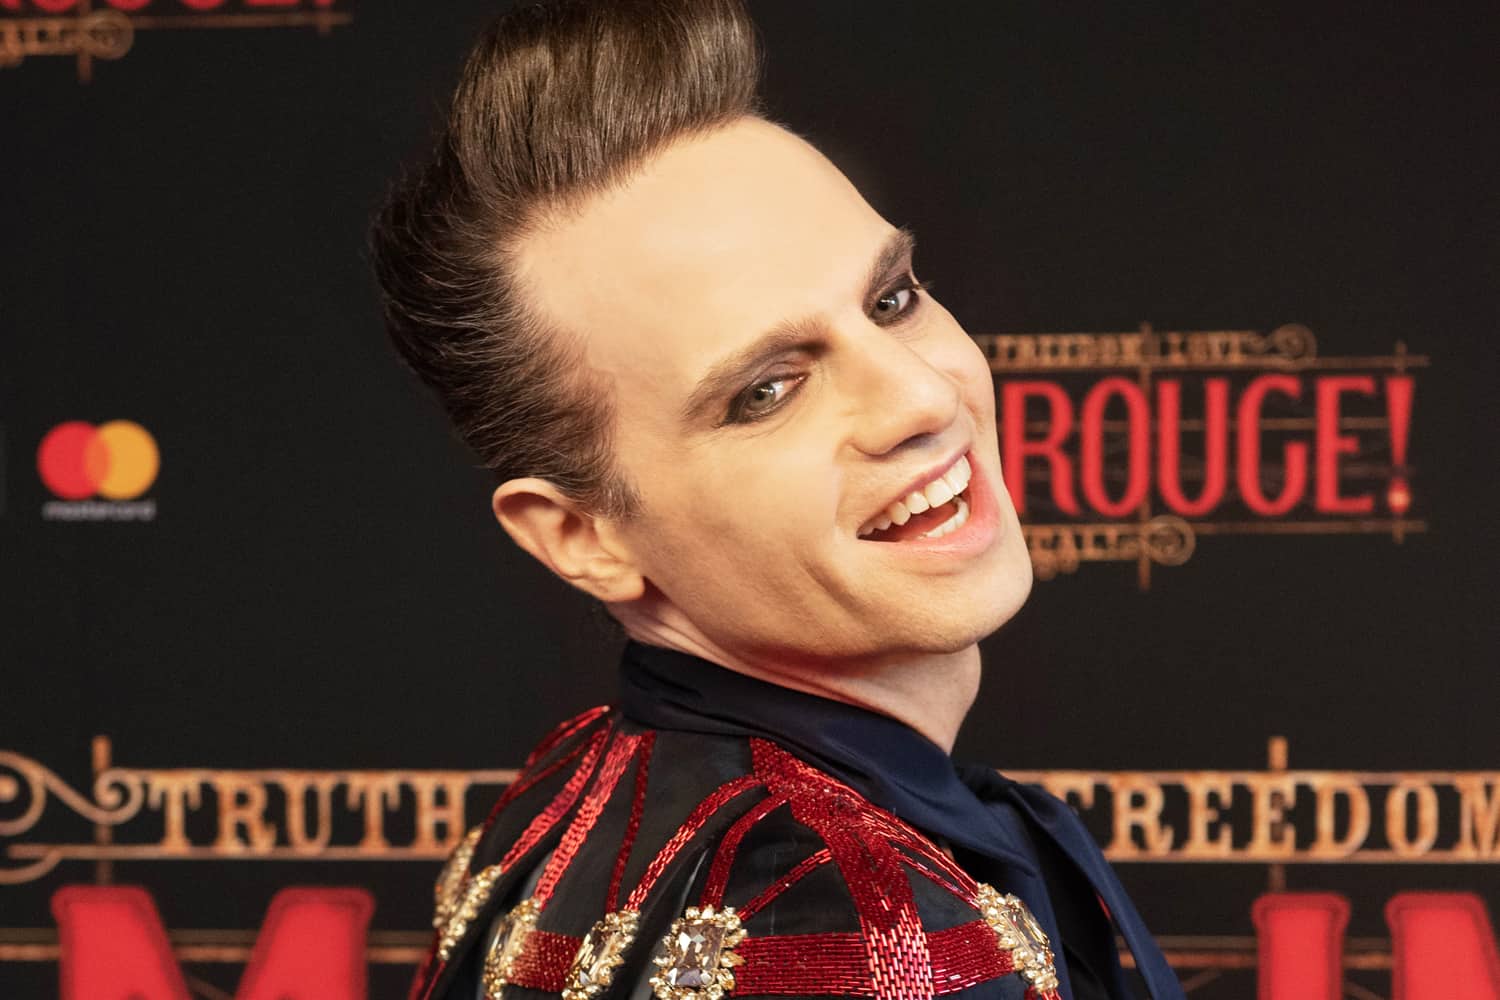 Jordan Roth's Moulin Rouge Look Is a Testament to Self-Love